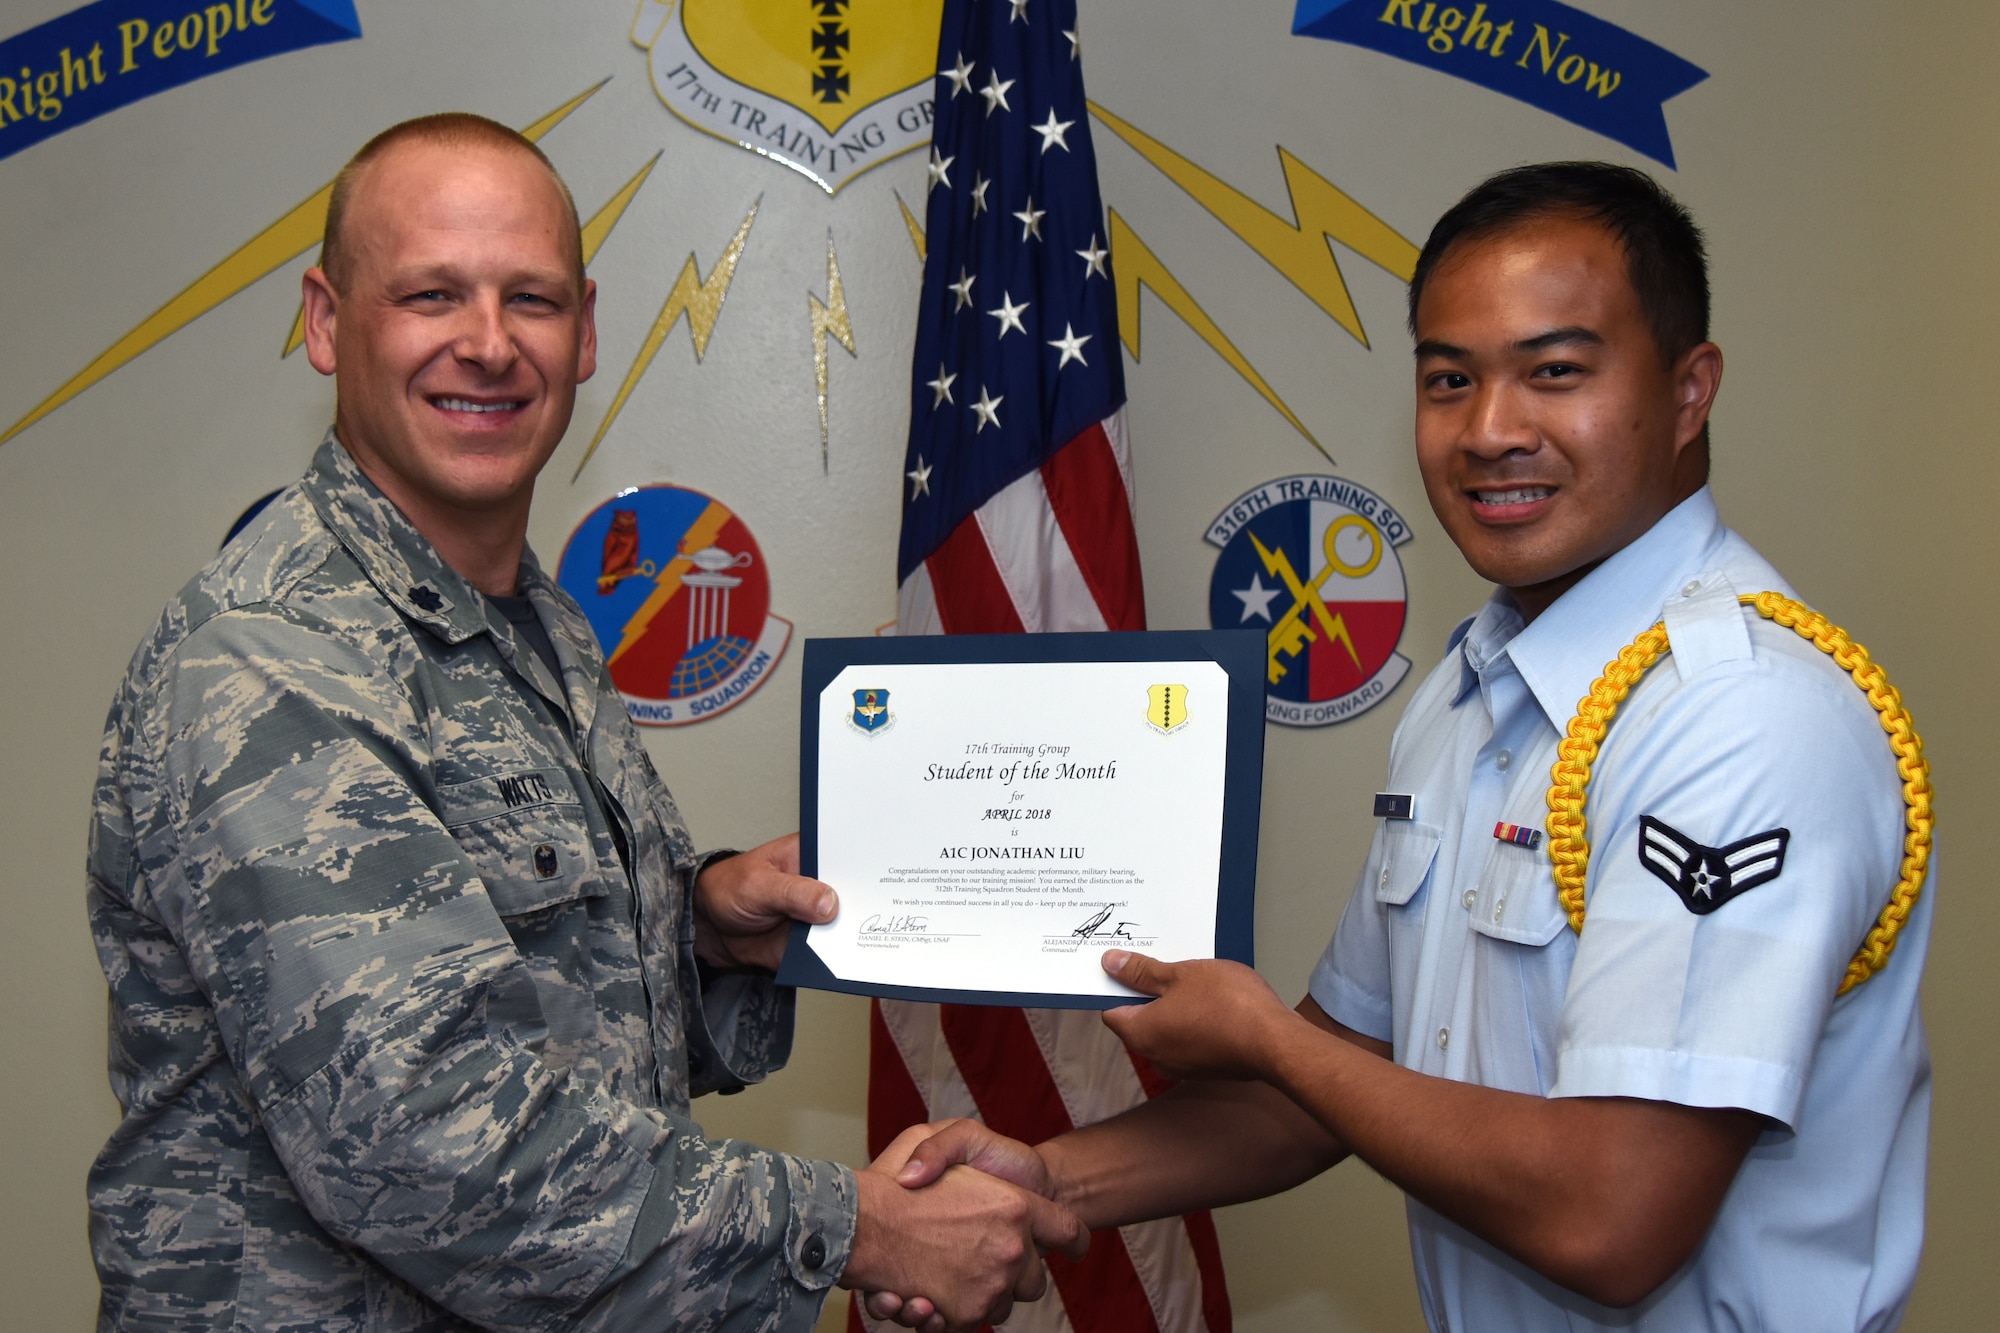 U.S. Air Force Lt. Col. Steven Watts, 17th Training Group deputy commander, presents the 312th Training Squadron Student of the Month award to Airman 1st Class Jonathan Liu, 312th TRS trainee, at Brandenburg Hall on Goodfellow Air Force Base, Texas, May 4, 2018. The 312th TRS’s mission is to provide Department of Defense and international customers with mission ready fire protection and special instruments graduates and provide mission support for the Air Force Technical Applications Center. (U.S. Air Force photo by Airman 1st Class Zachary Chapman/Released)